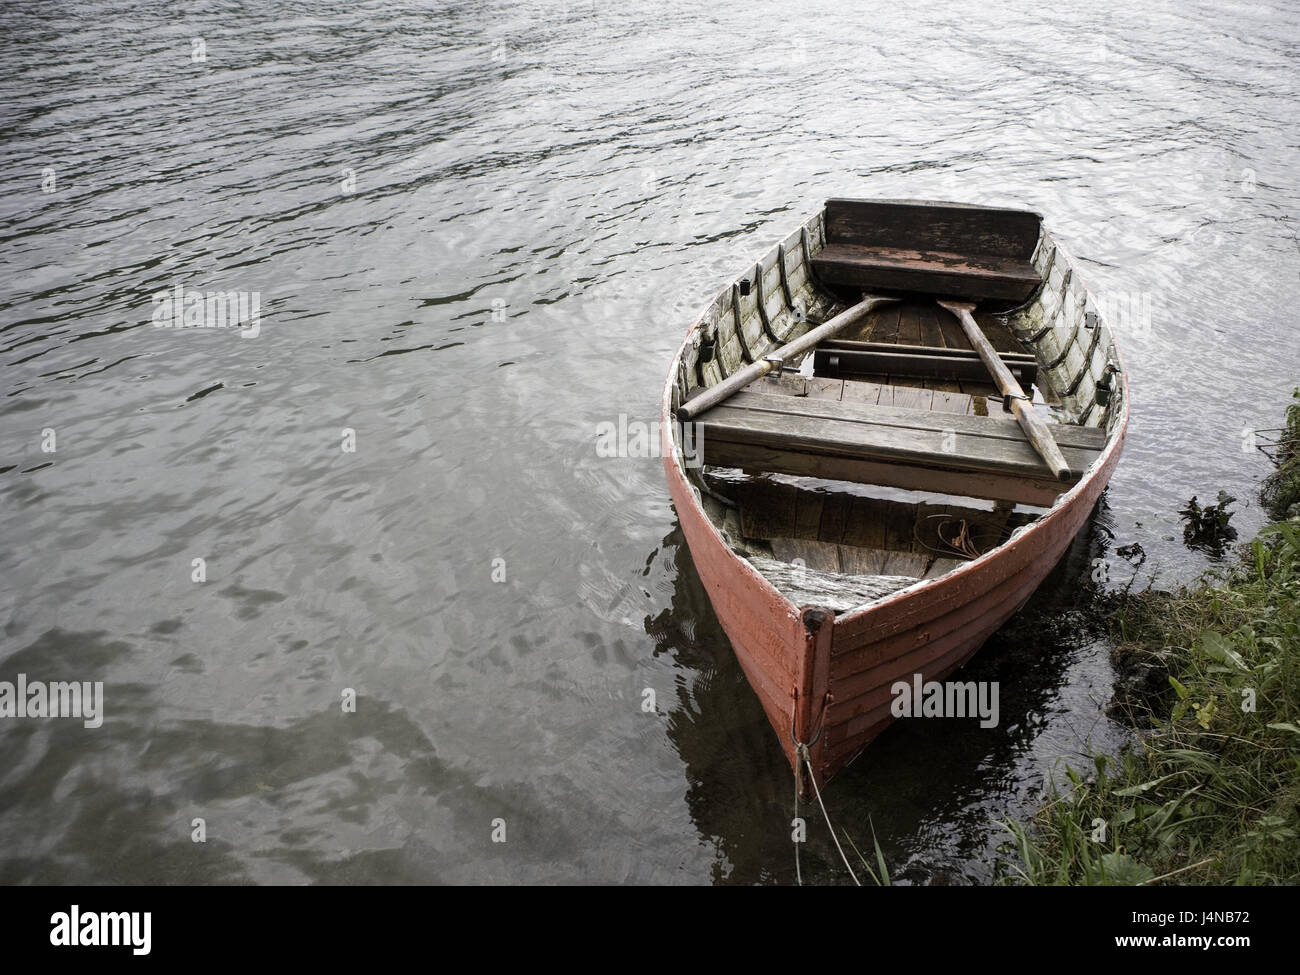 Austria, Styria, Erlaufsee, oar boot, lake, lakeside, shore, icon, waters, exit, silence, rain weather, rain, bad weather, lonely, oar, wooden boot, boat, water, Stock Photo